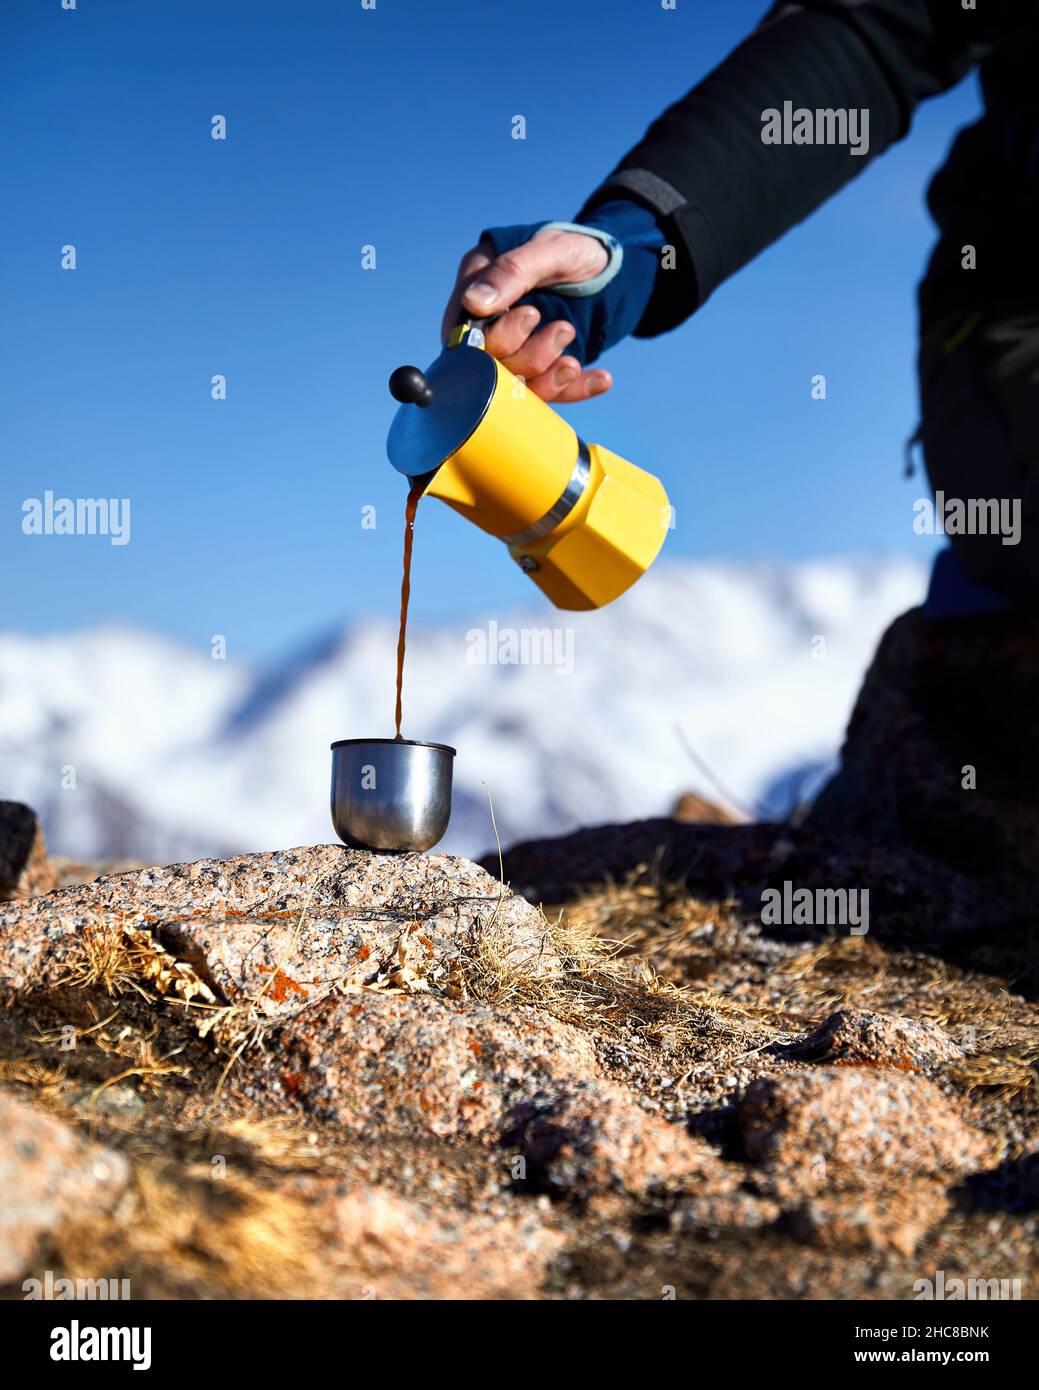 Man hiker pouring coffee from Yellow Moka mocha pot outdoors in the snow winter mountains. Old style coffee vintage pot outdoor camping Stock Photo